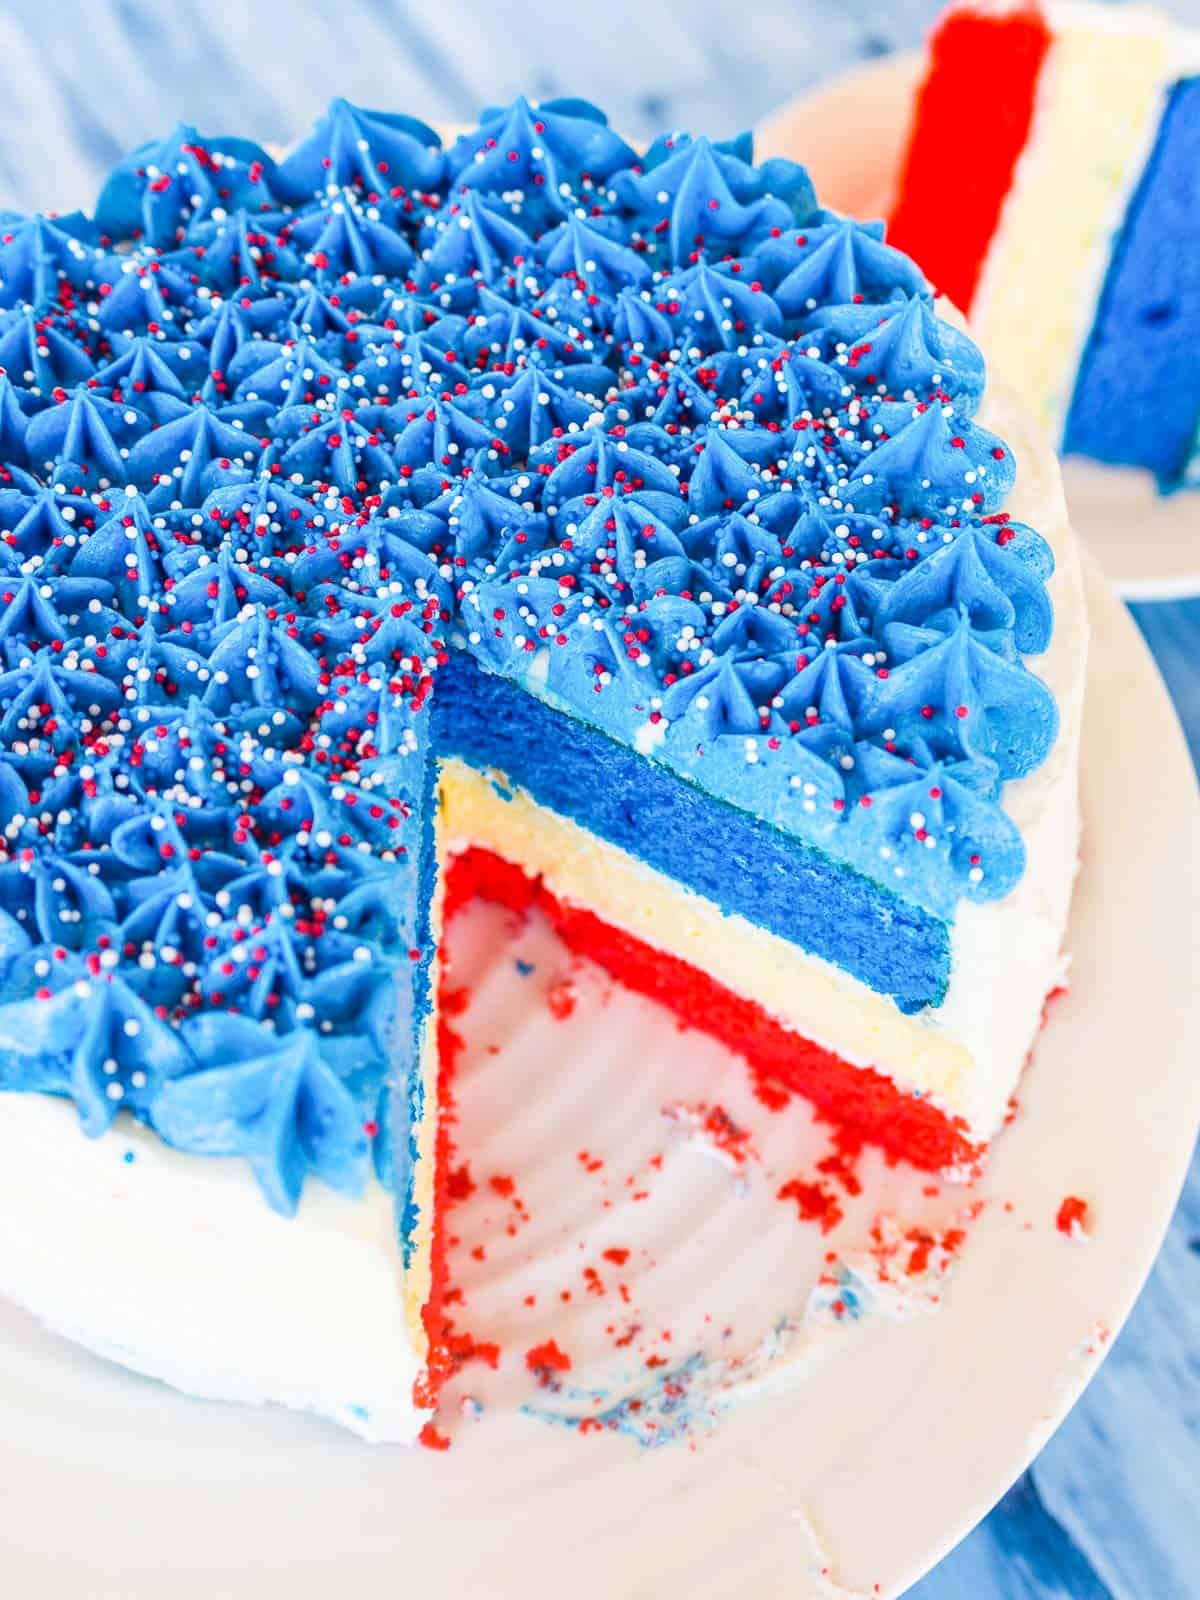 https://www.delicioustable.com/wp-content/uploads/2021/06/July-4th-cake.jpg